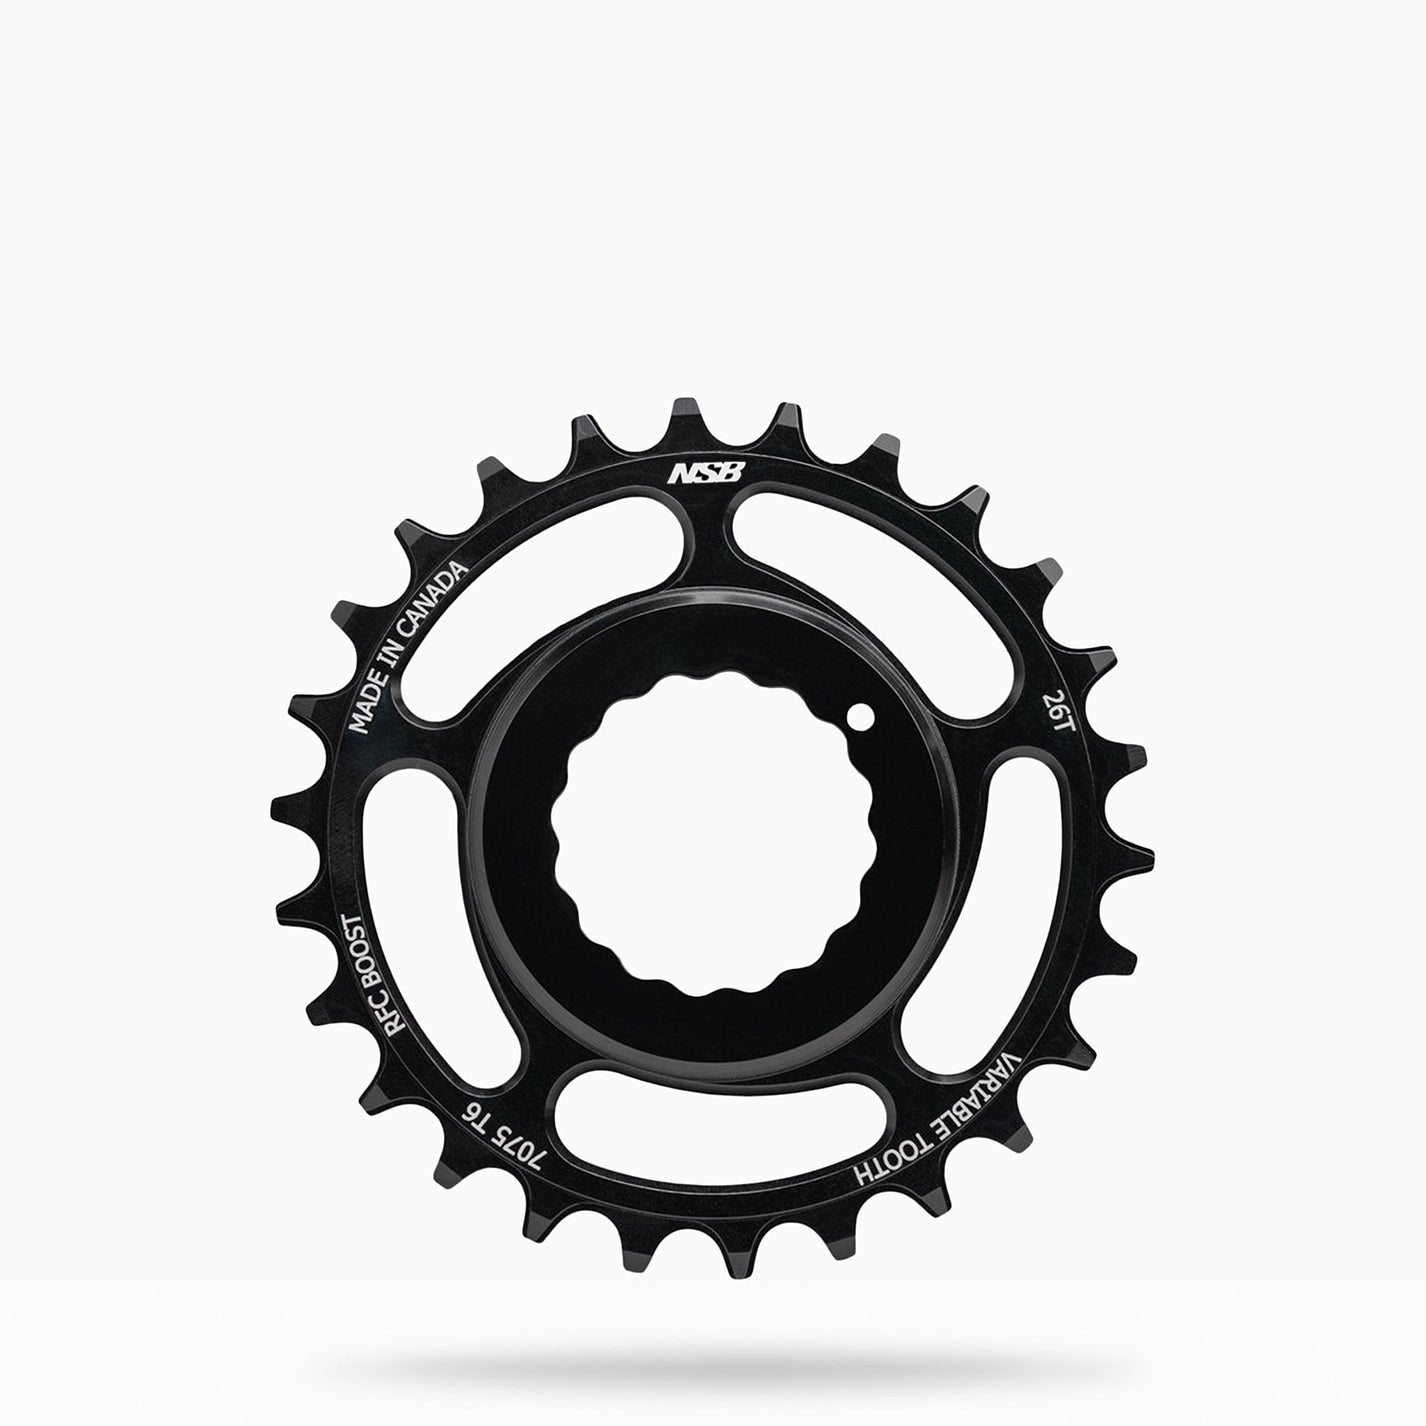 Race Face Cinch Narrow Wide Chainrings – North Shore Billet